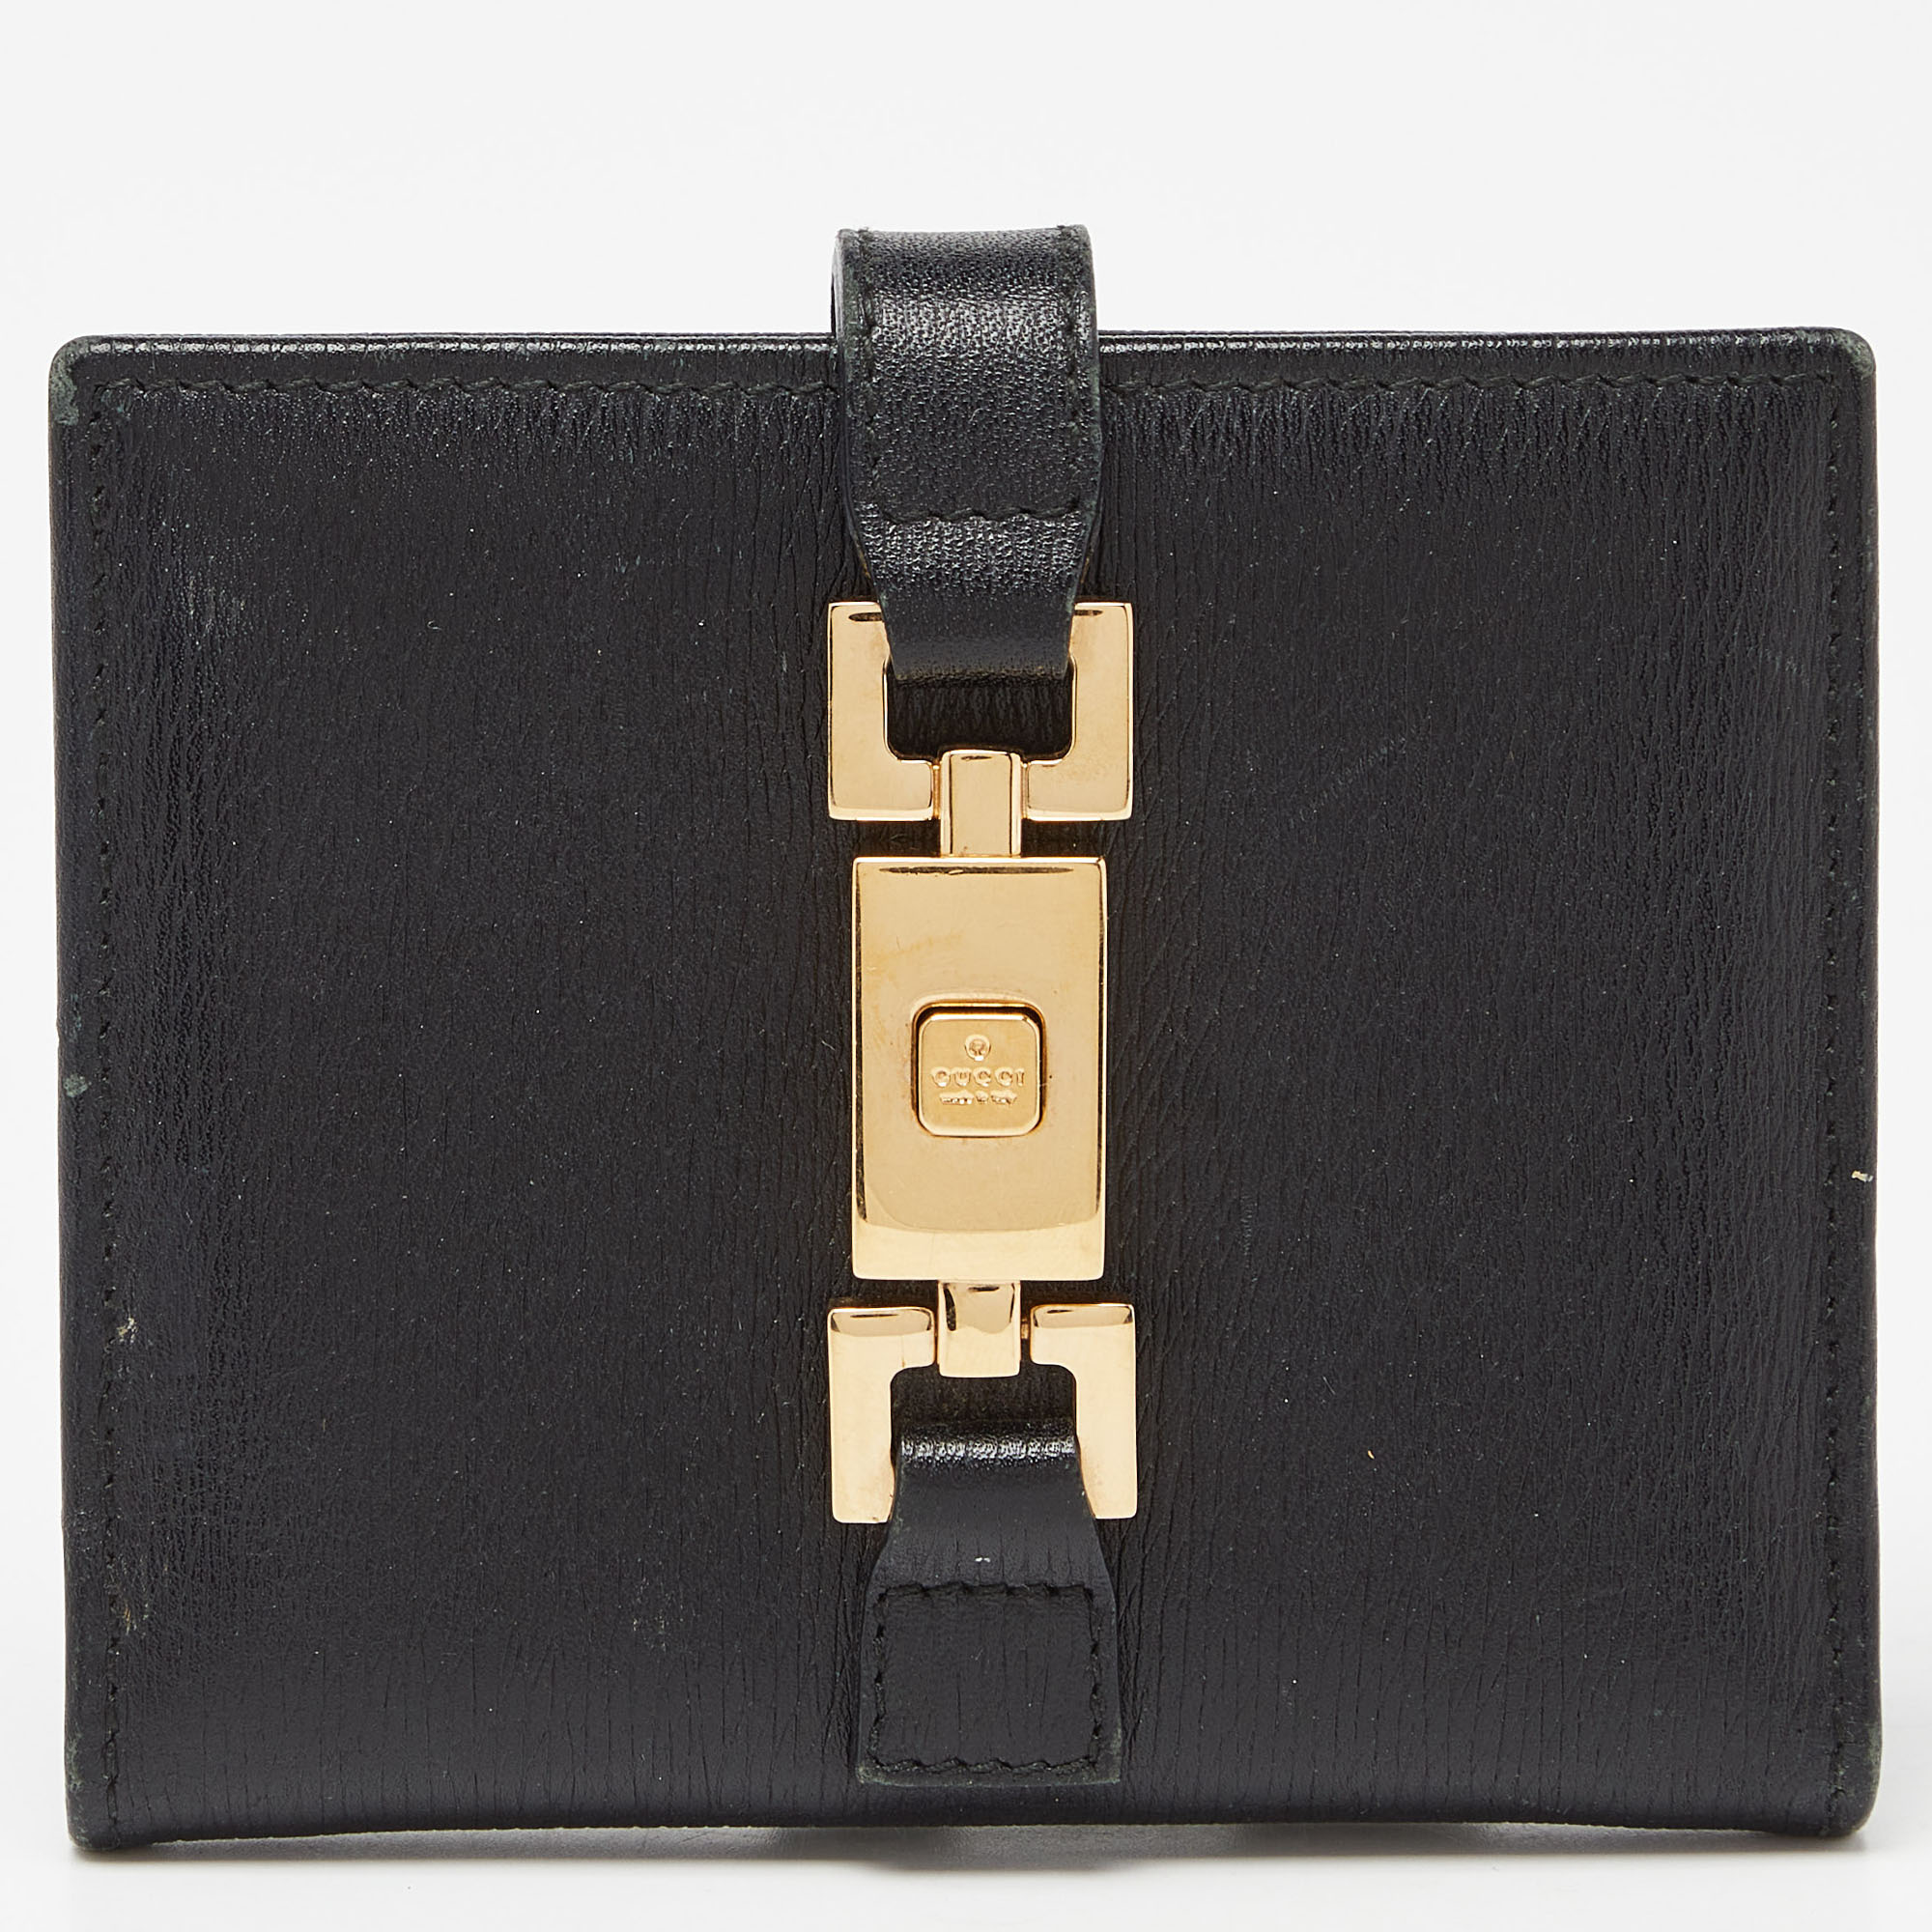 Pre-owned Gucci Black Leather Jackie Compact Wallet